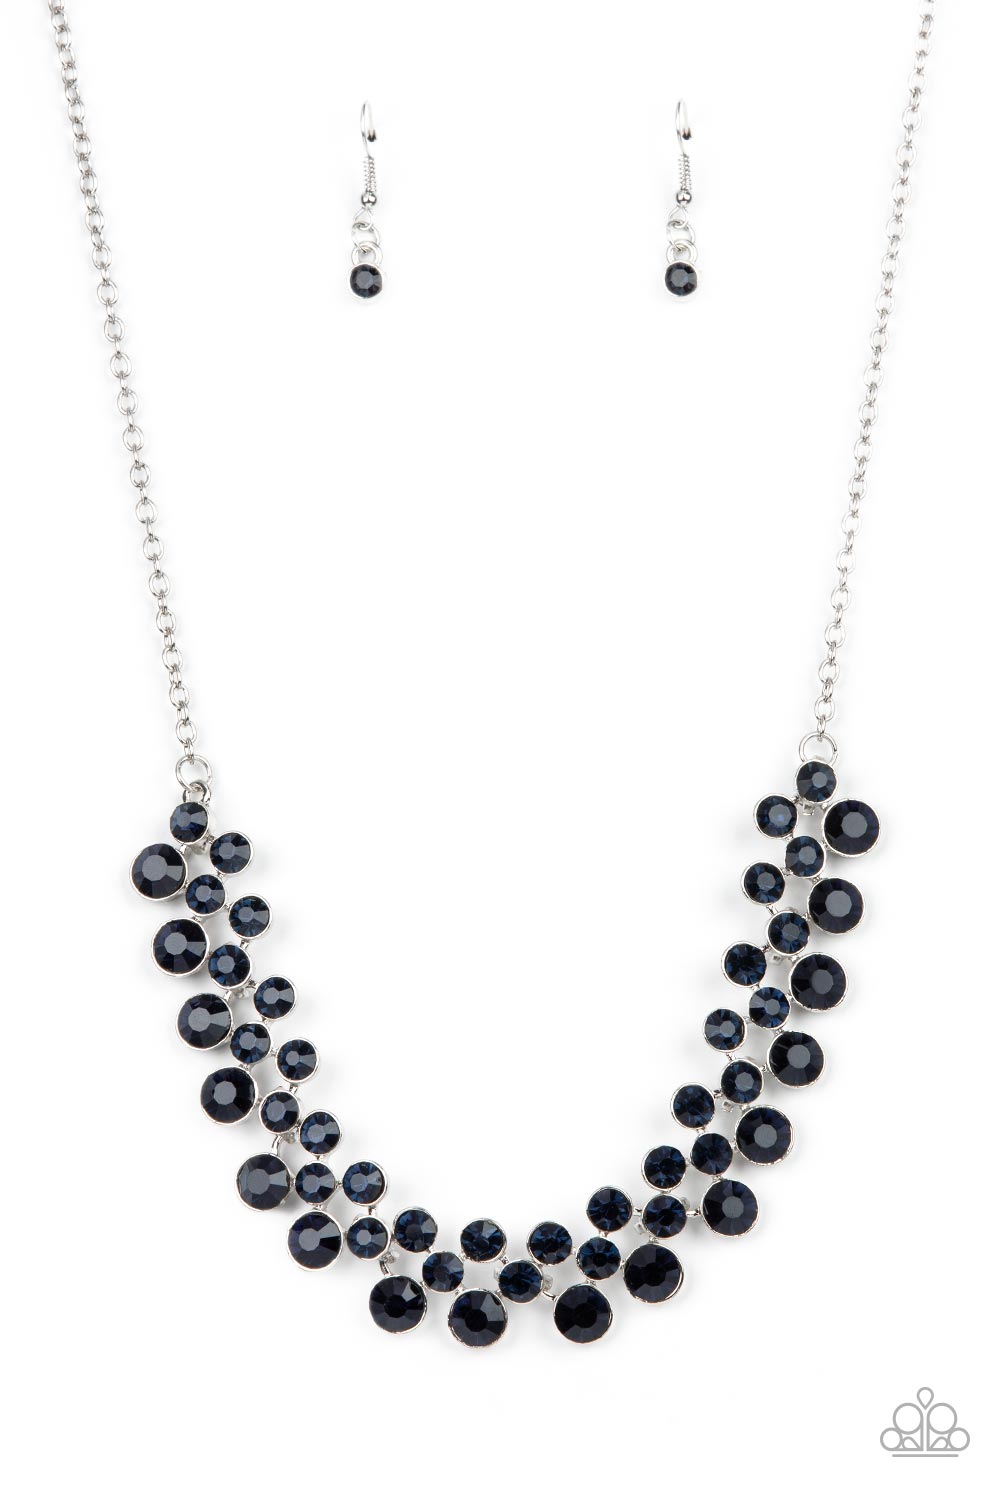 Won The Lottery Blue Rhinestone Necklace - Paparazzi Accessories- lightbox - CarasShop.com - $5 Jewelry by Cara Jewels